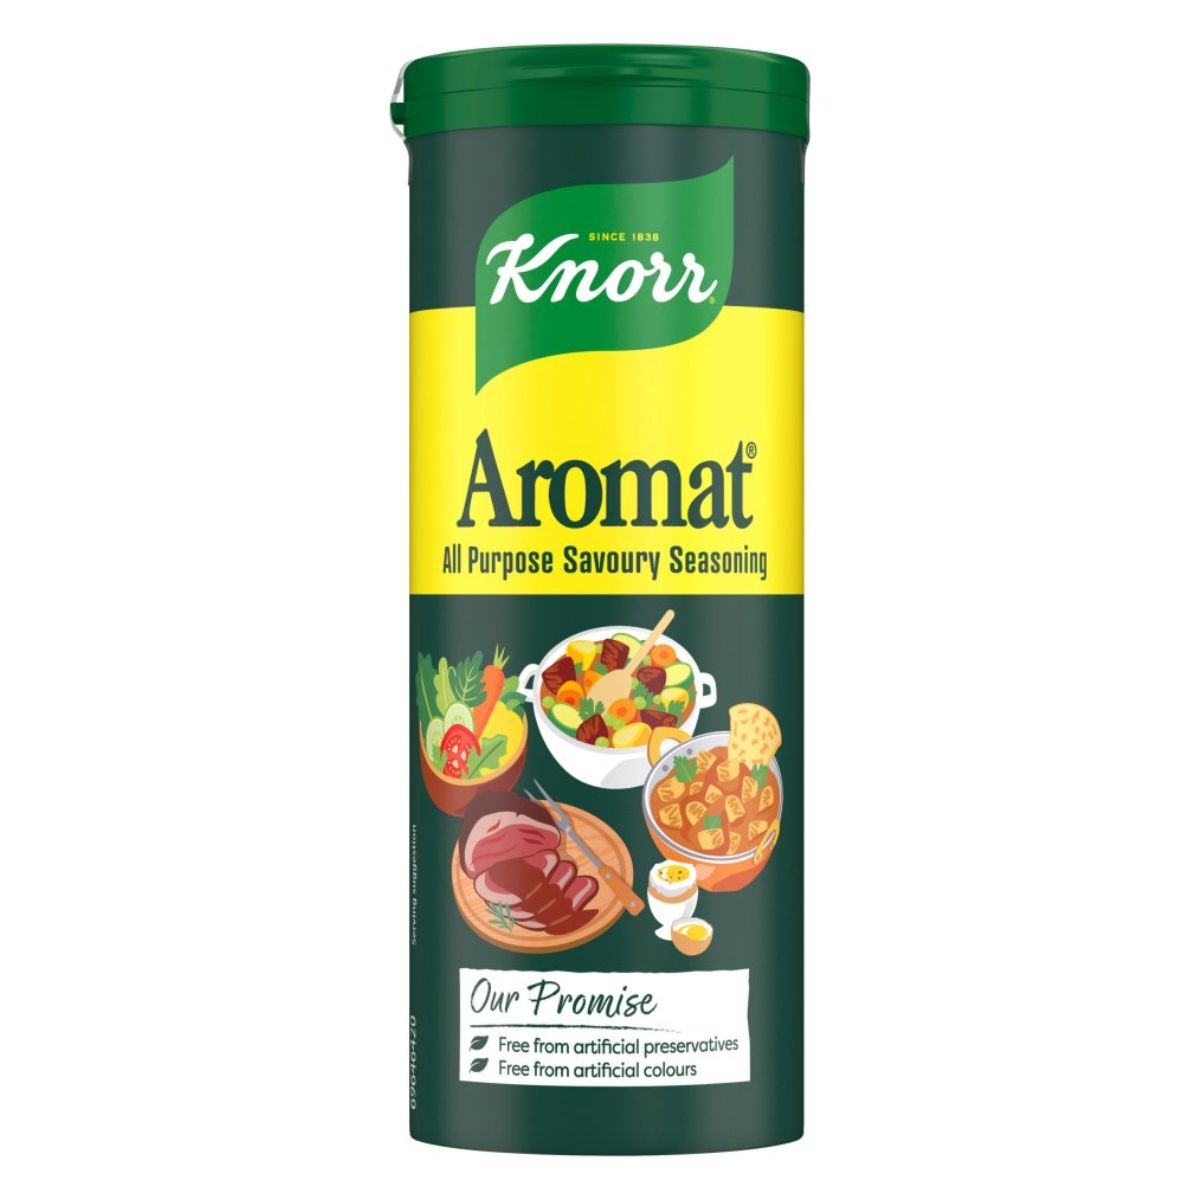 A container of Knorr - All Purpose Savoury Seasoning Aromat - 90g featuring images of vegetables, meat, and dishes on the label.